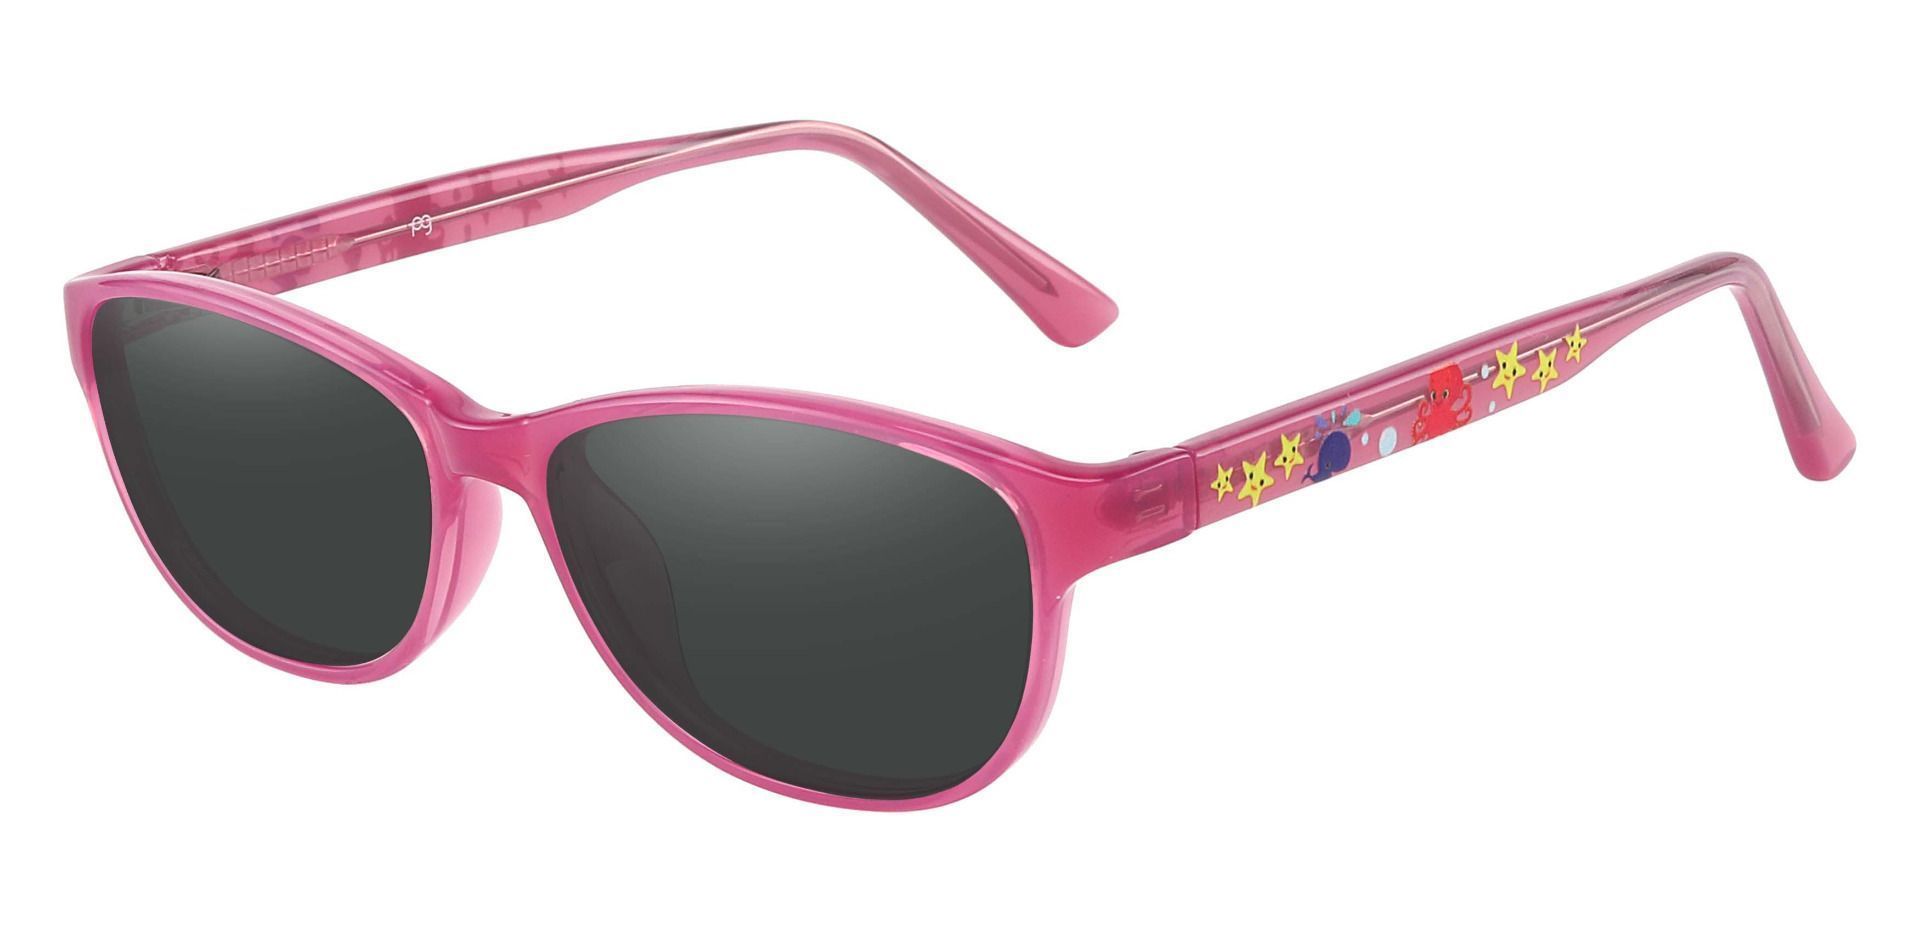 Patsy Oval Reading Sunglasses - Pink Frame With Gray Lenses